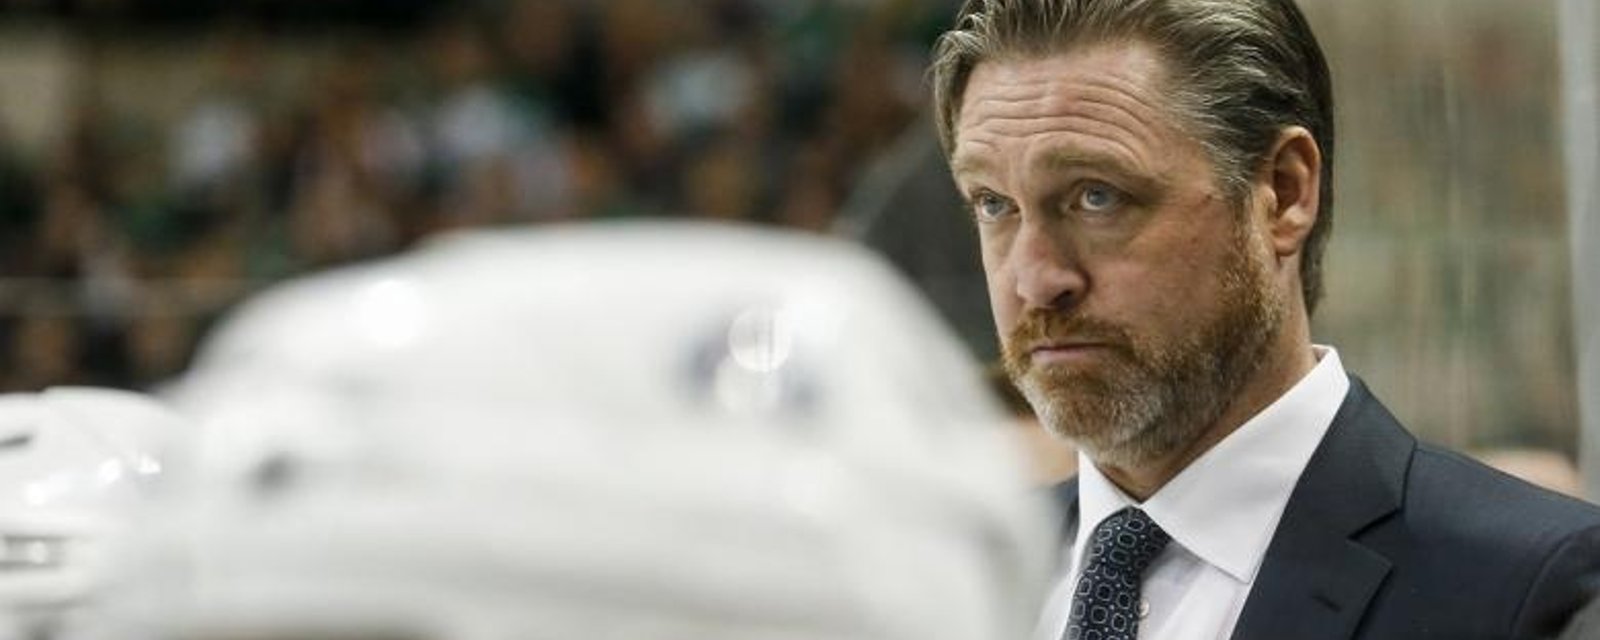 Rumors that Patrick Roy is orchestrating a monster trade with his former team.